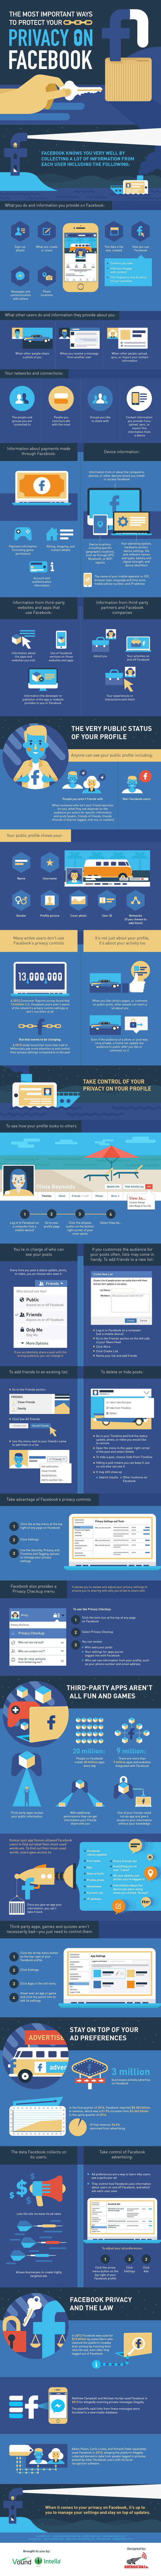 Protect Your Privacy on Facebook Infographic